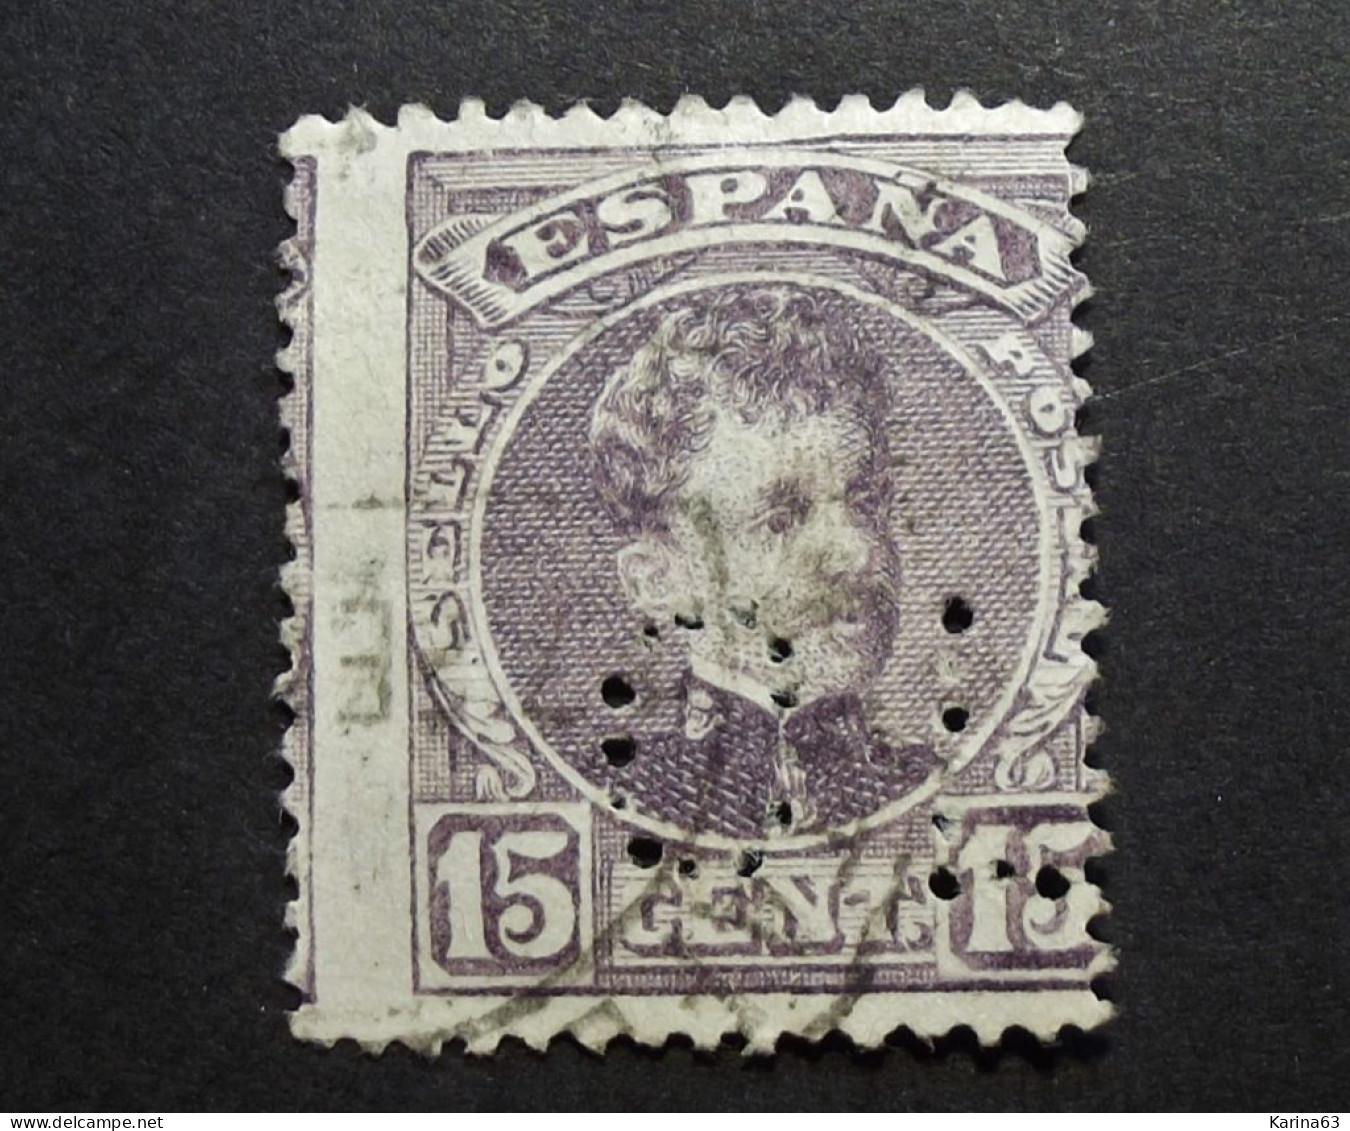 Espana - Spain - Alfonso XIII -  Perfin - Lochung  With Number - C L - Credito Lyones - Cancelled - Usati